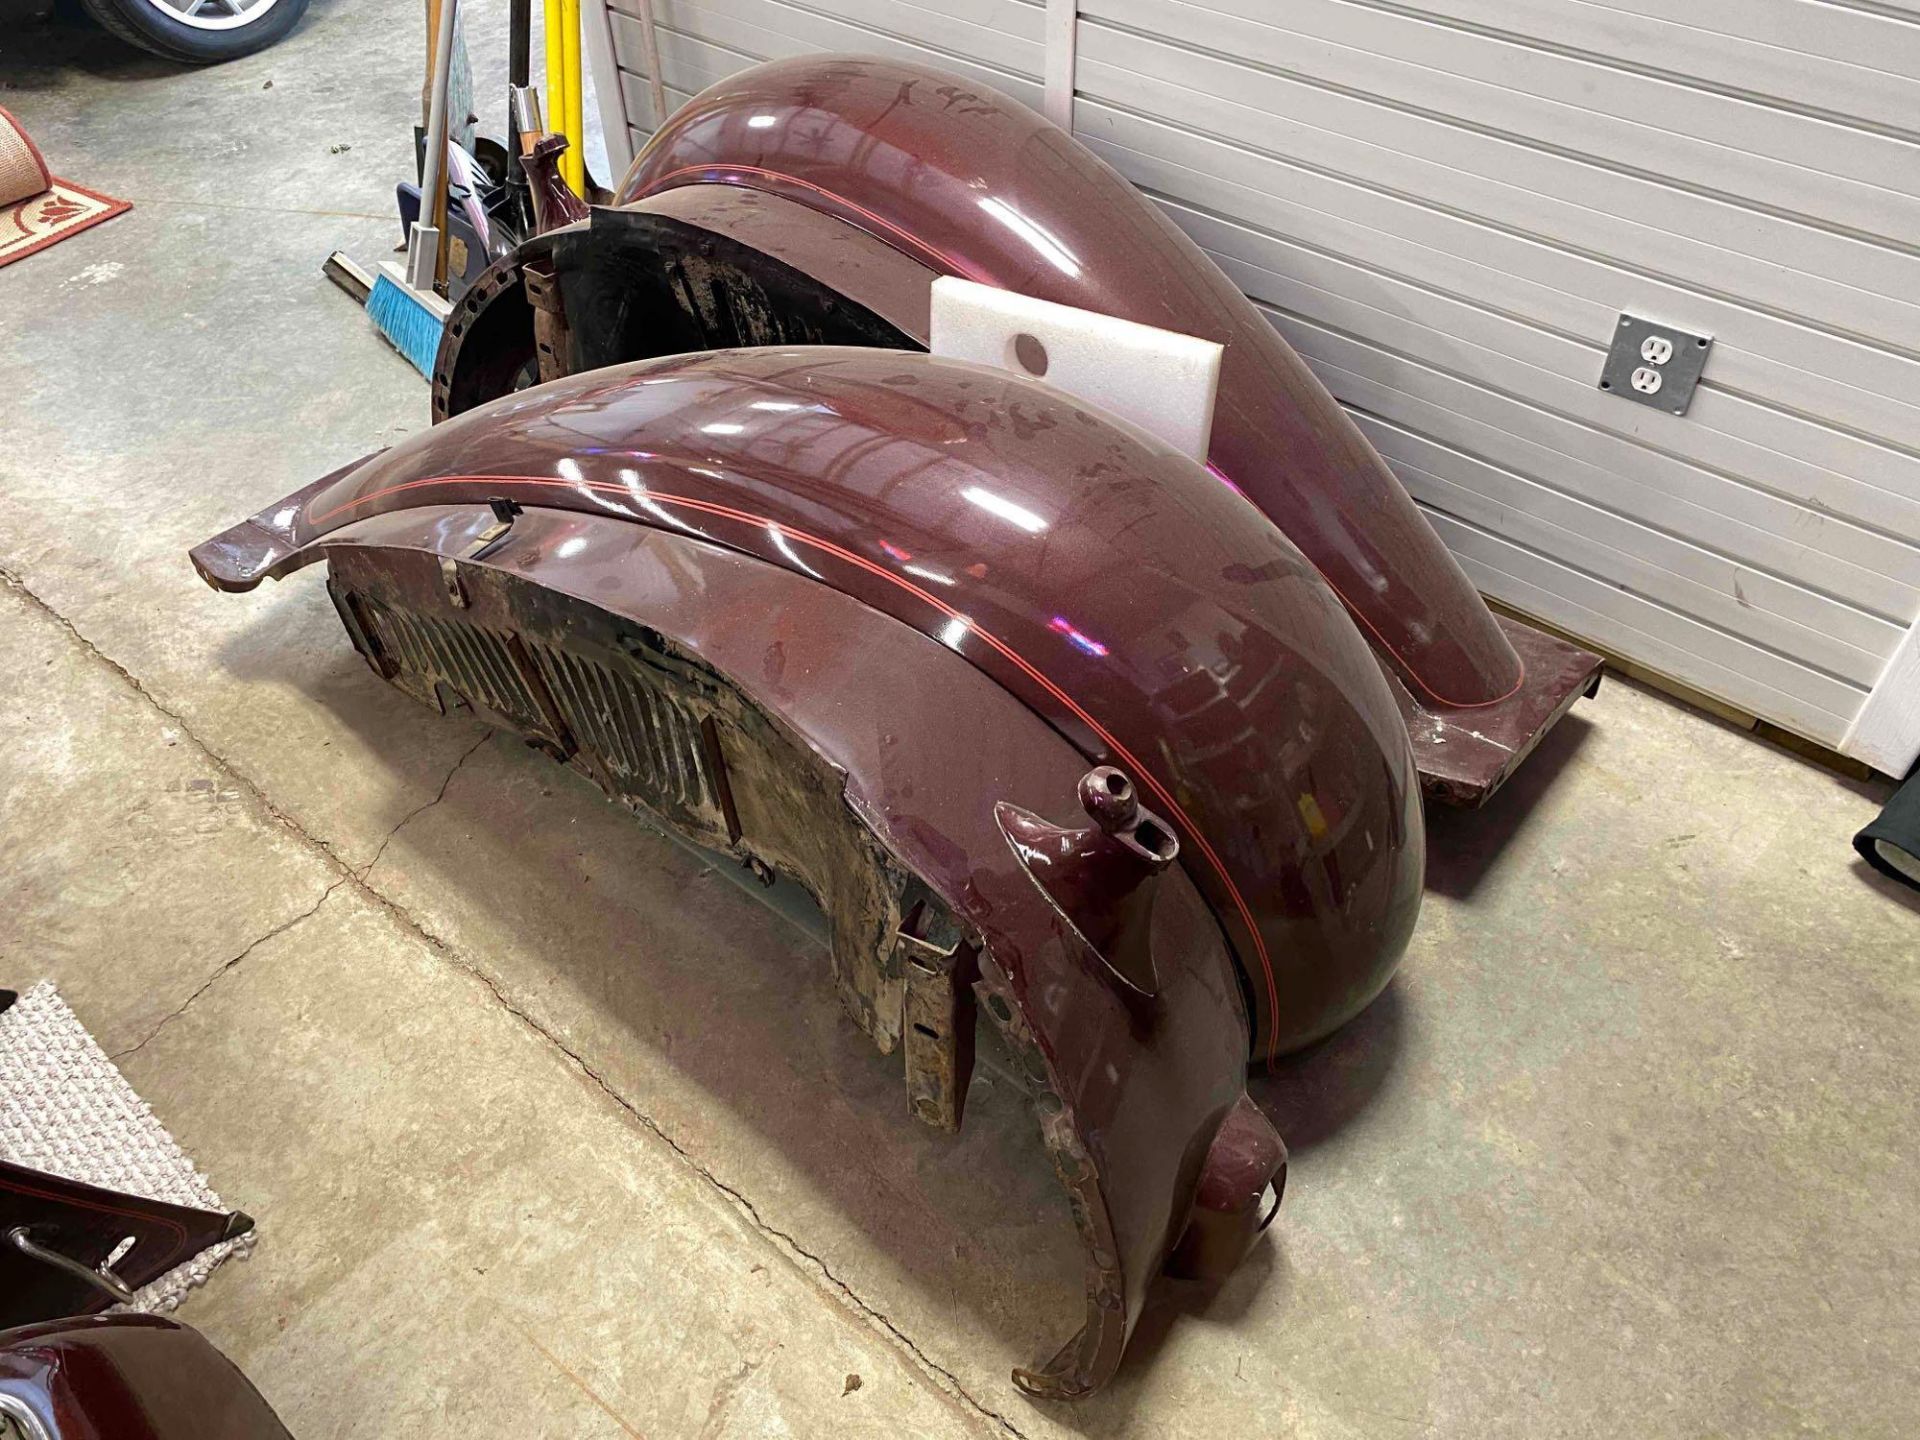 ’35 Plymouth Coupe Including Body Panels, Frame, Lights, etc. ***No Engine, Transmission, etc.*** - Image 3 of 16